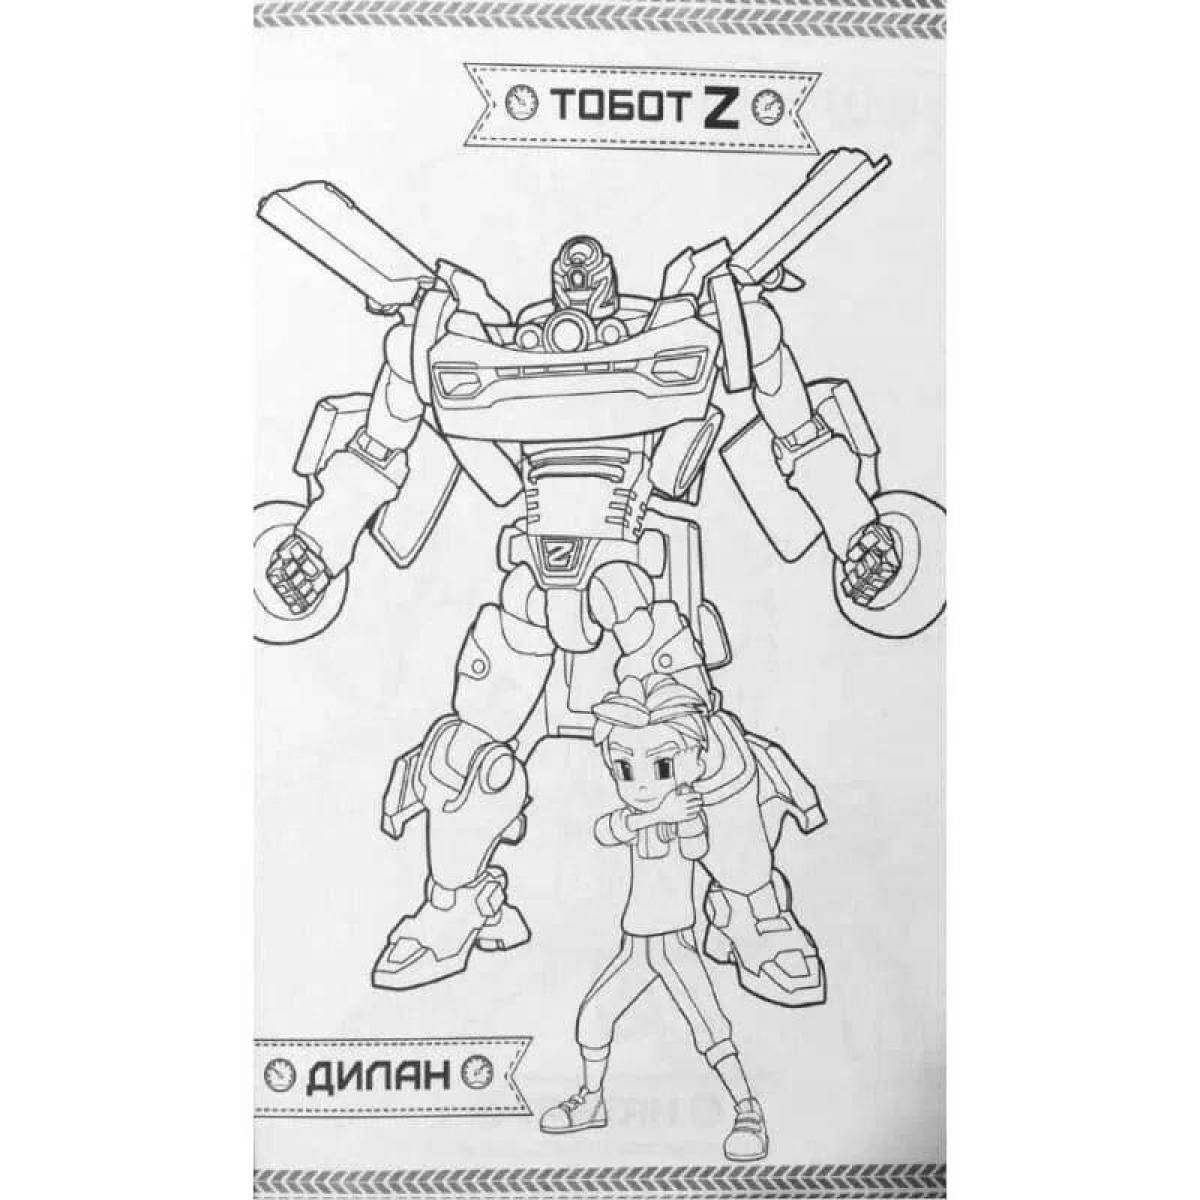 Colourful tobots coloring page